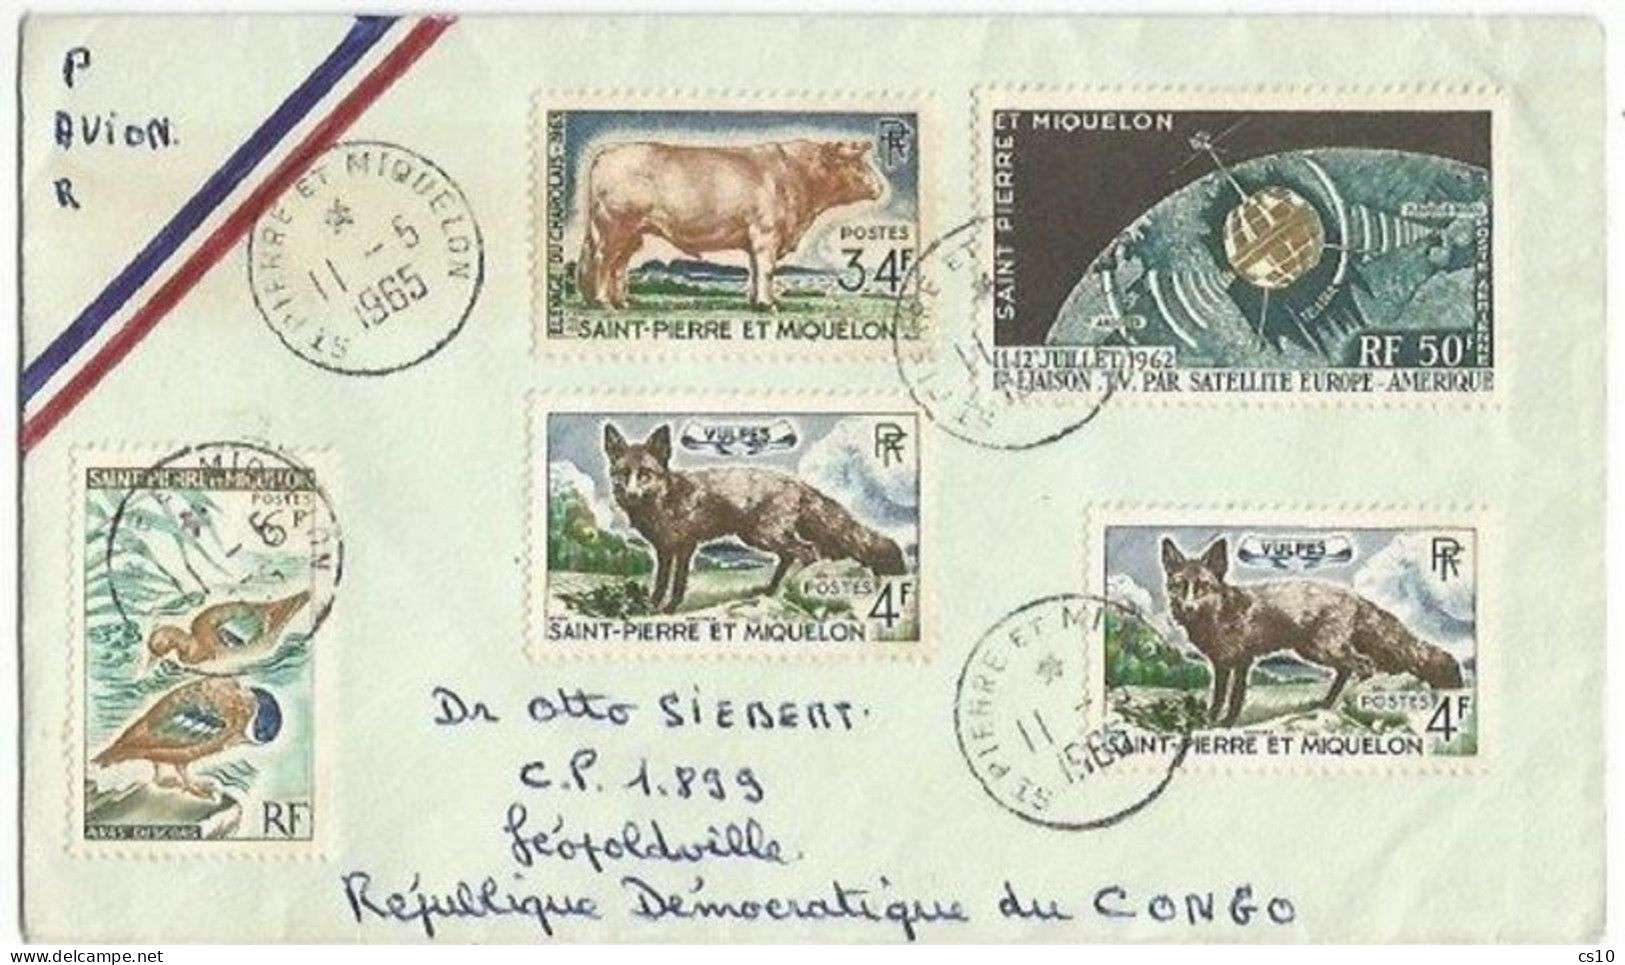 SCARCE! St.Pierre Miquelon AirmailCV 11may1965 With 5 Stamps Rate 98F DIRECTED TO CONGO Not France Or Canada !!!!!! - Amérique Du Nord